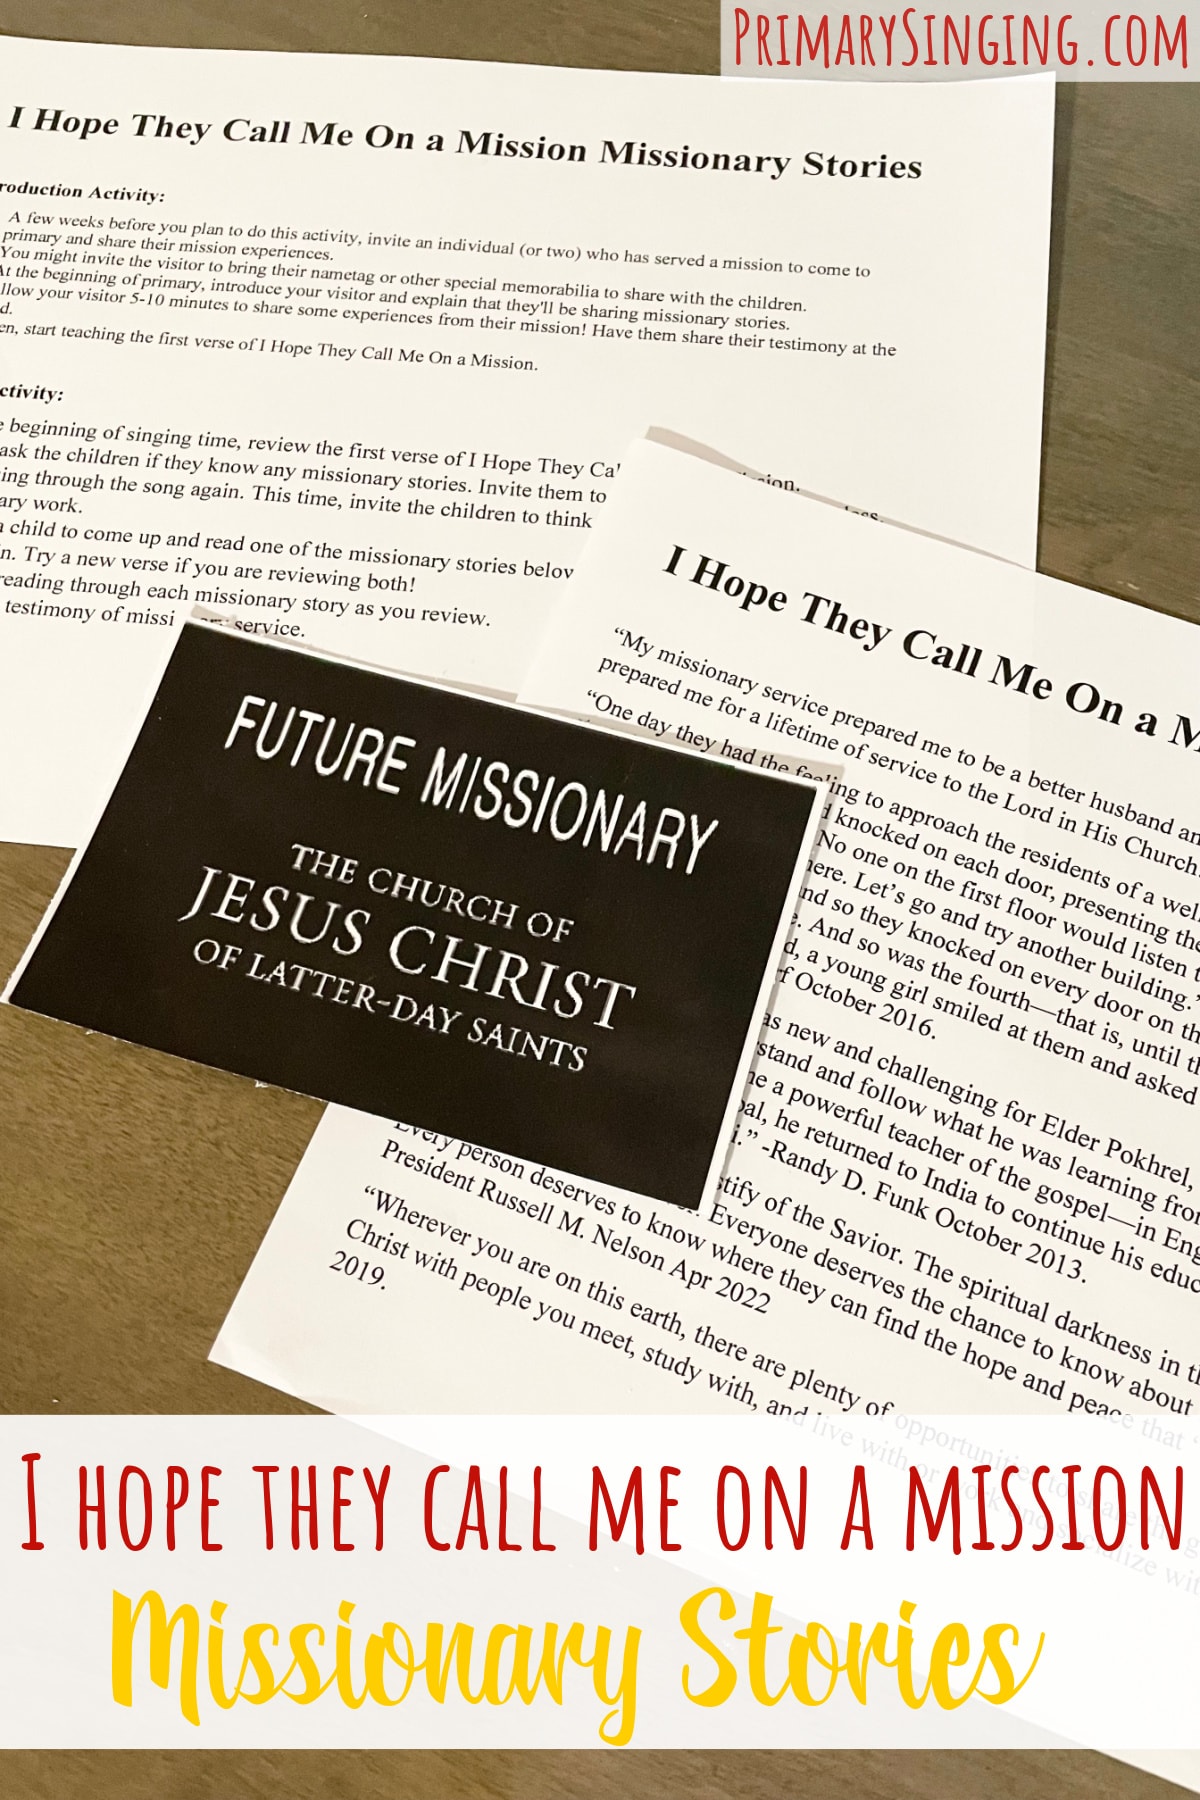 I Hope They Call Me On a Mission Missionary Stories Singing time ideas for Primary Music Leaders I Hope They Call Me On a Mission Missionary Stories